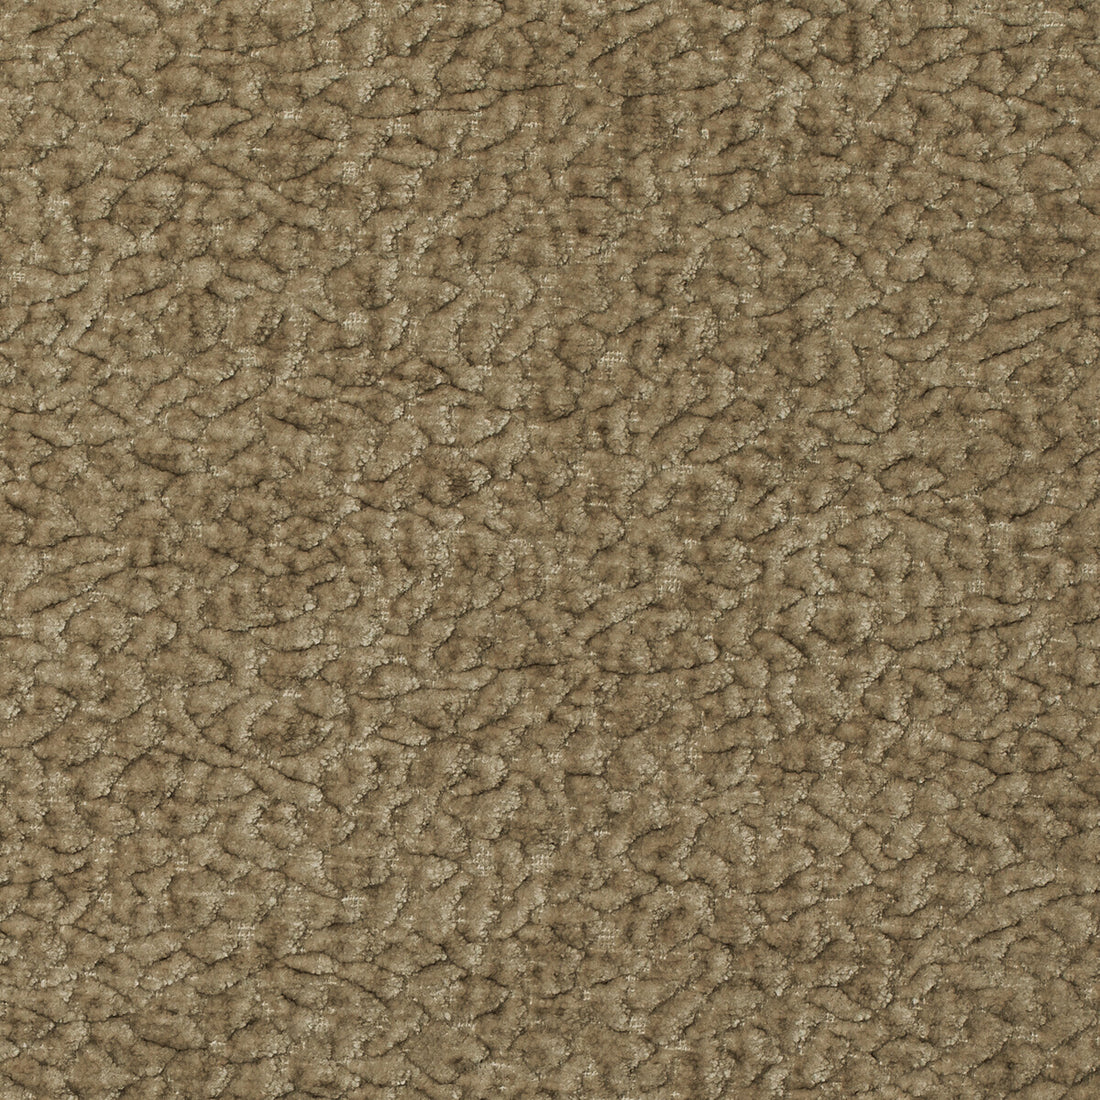 Barton Chenille fabric in fossil color - pattern 36074.16.0 - by Kravet Smart